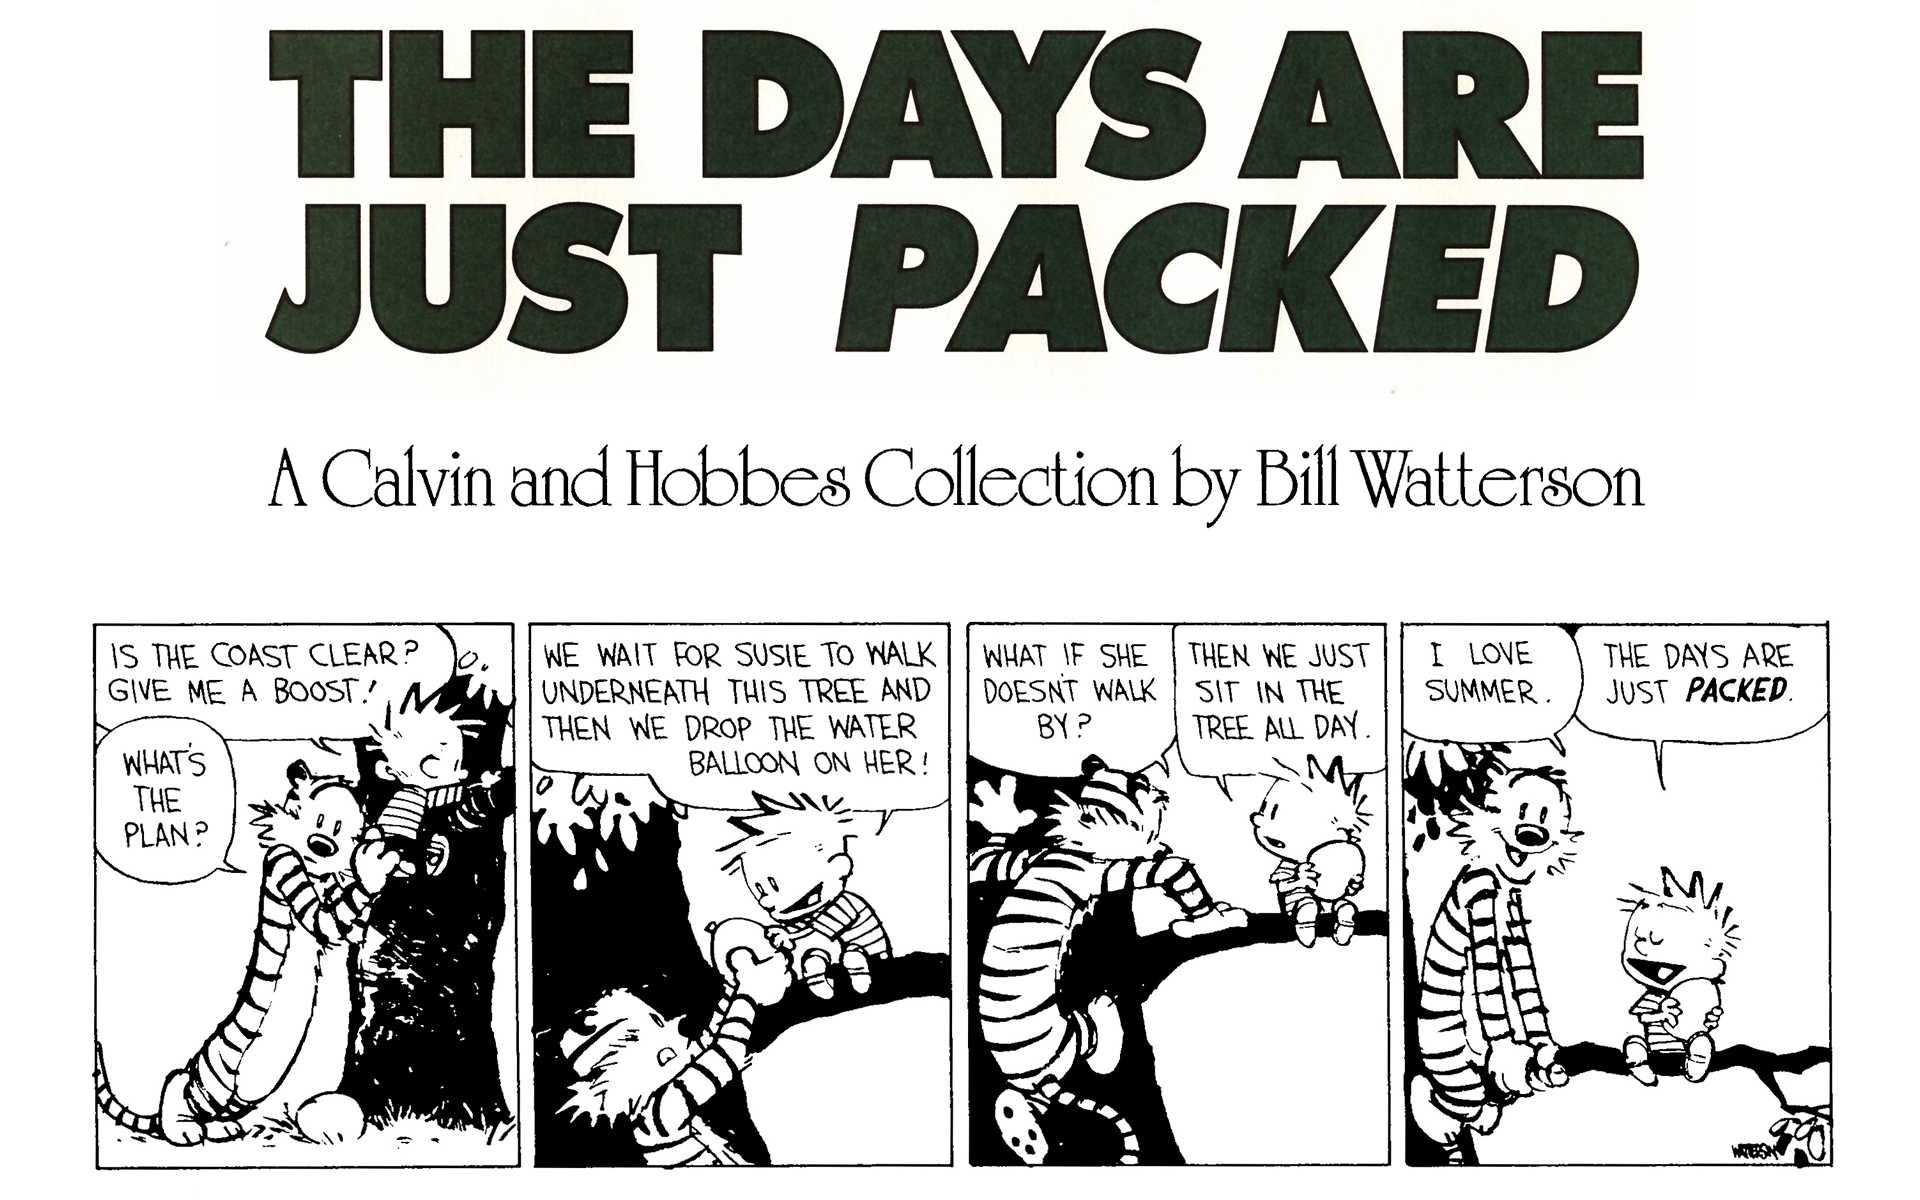 Calvin And Hobbes Issue 8 | Read Calvin And Hobbes Issue 8 comic online in  high quality. Read Full Comic online for free - Read comics online in high  quality .|viewcomiconline.com